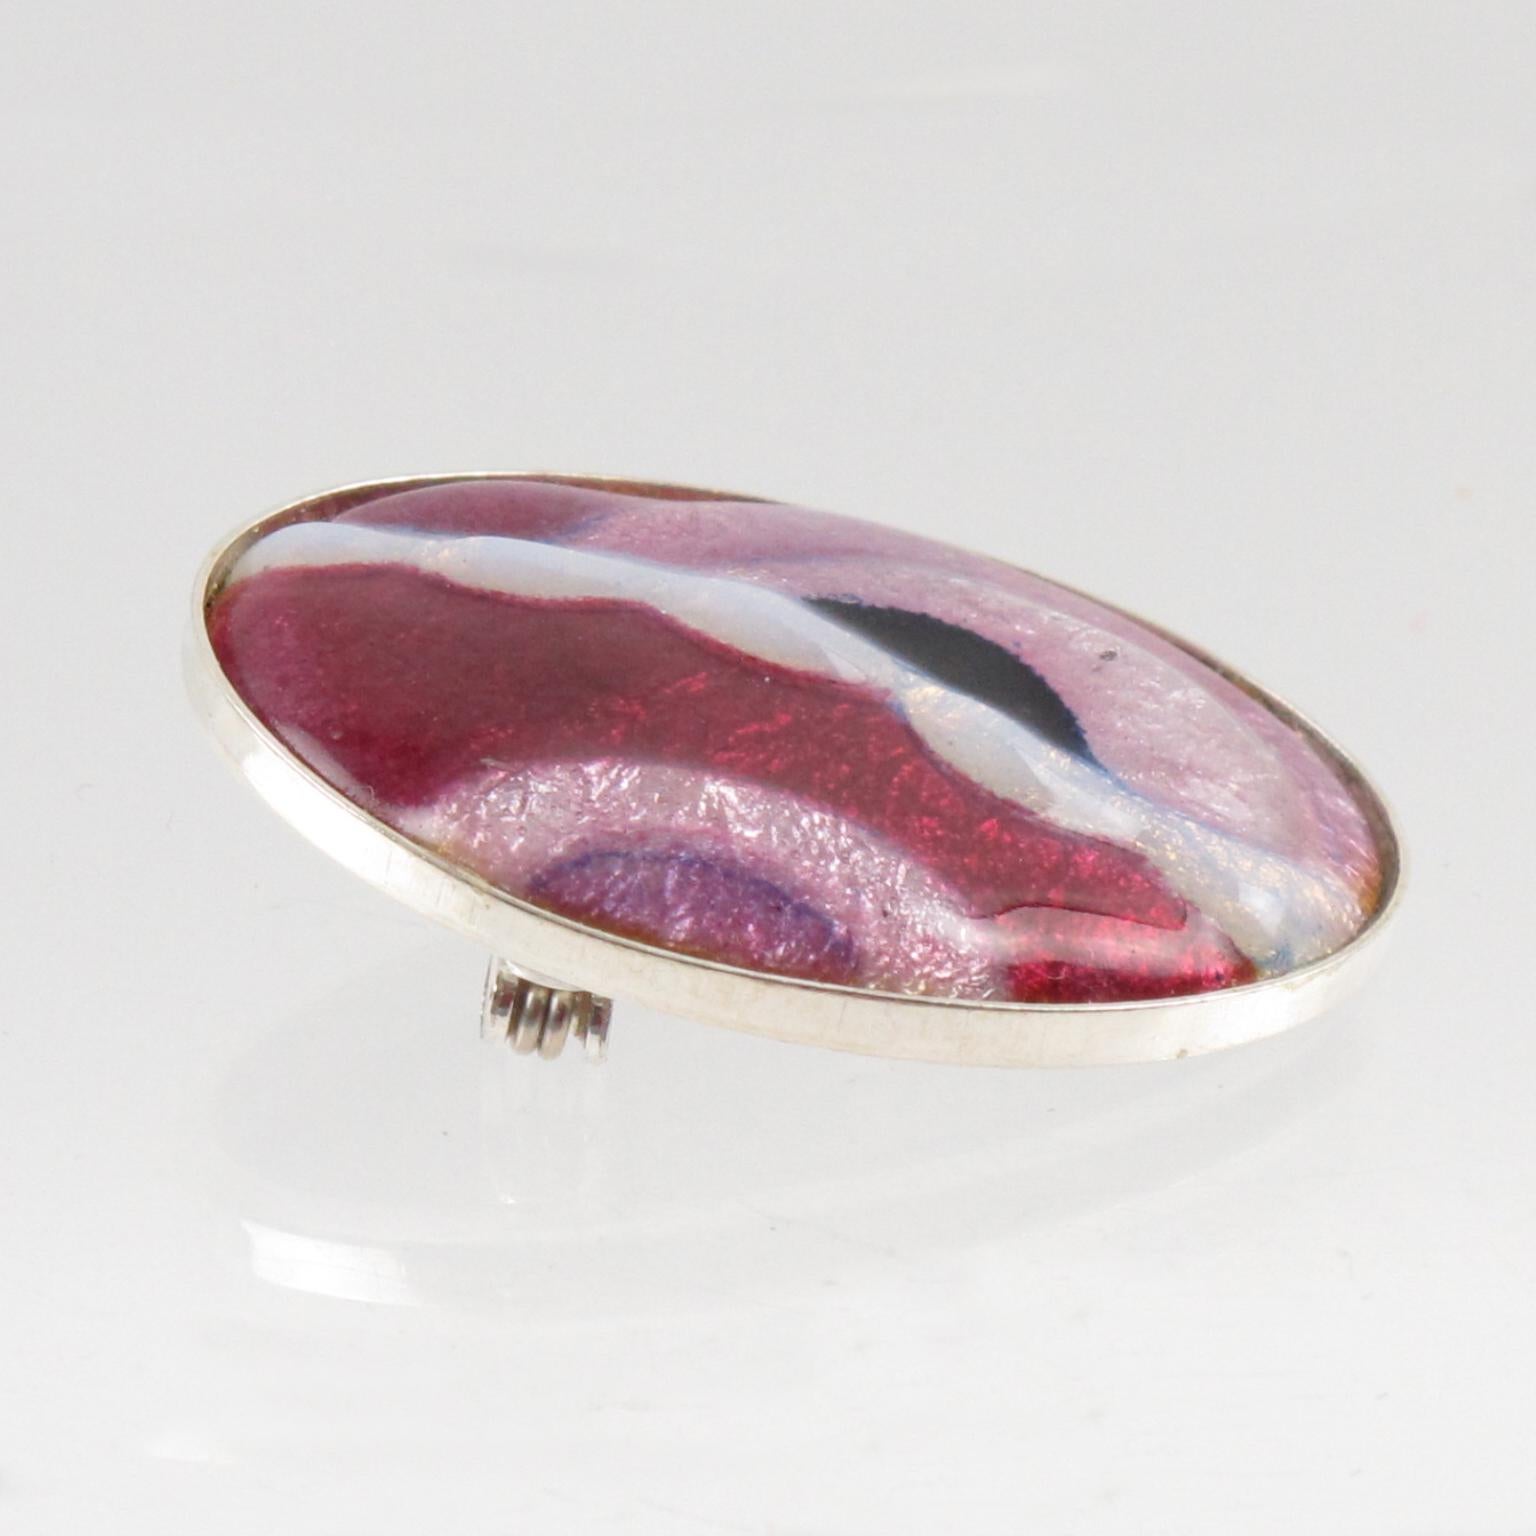 Camille Faure Limoges School Art Deco Inspired Pink Enamel Pin Brooch For Sale 1